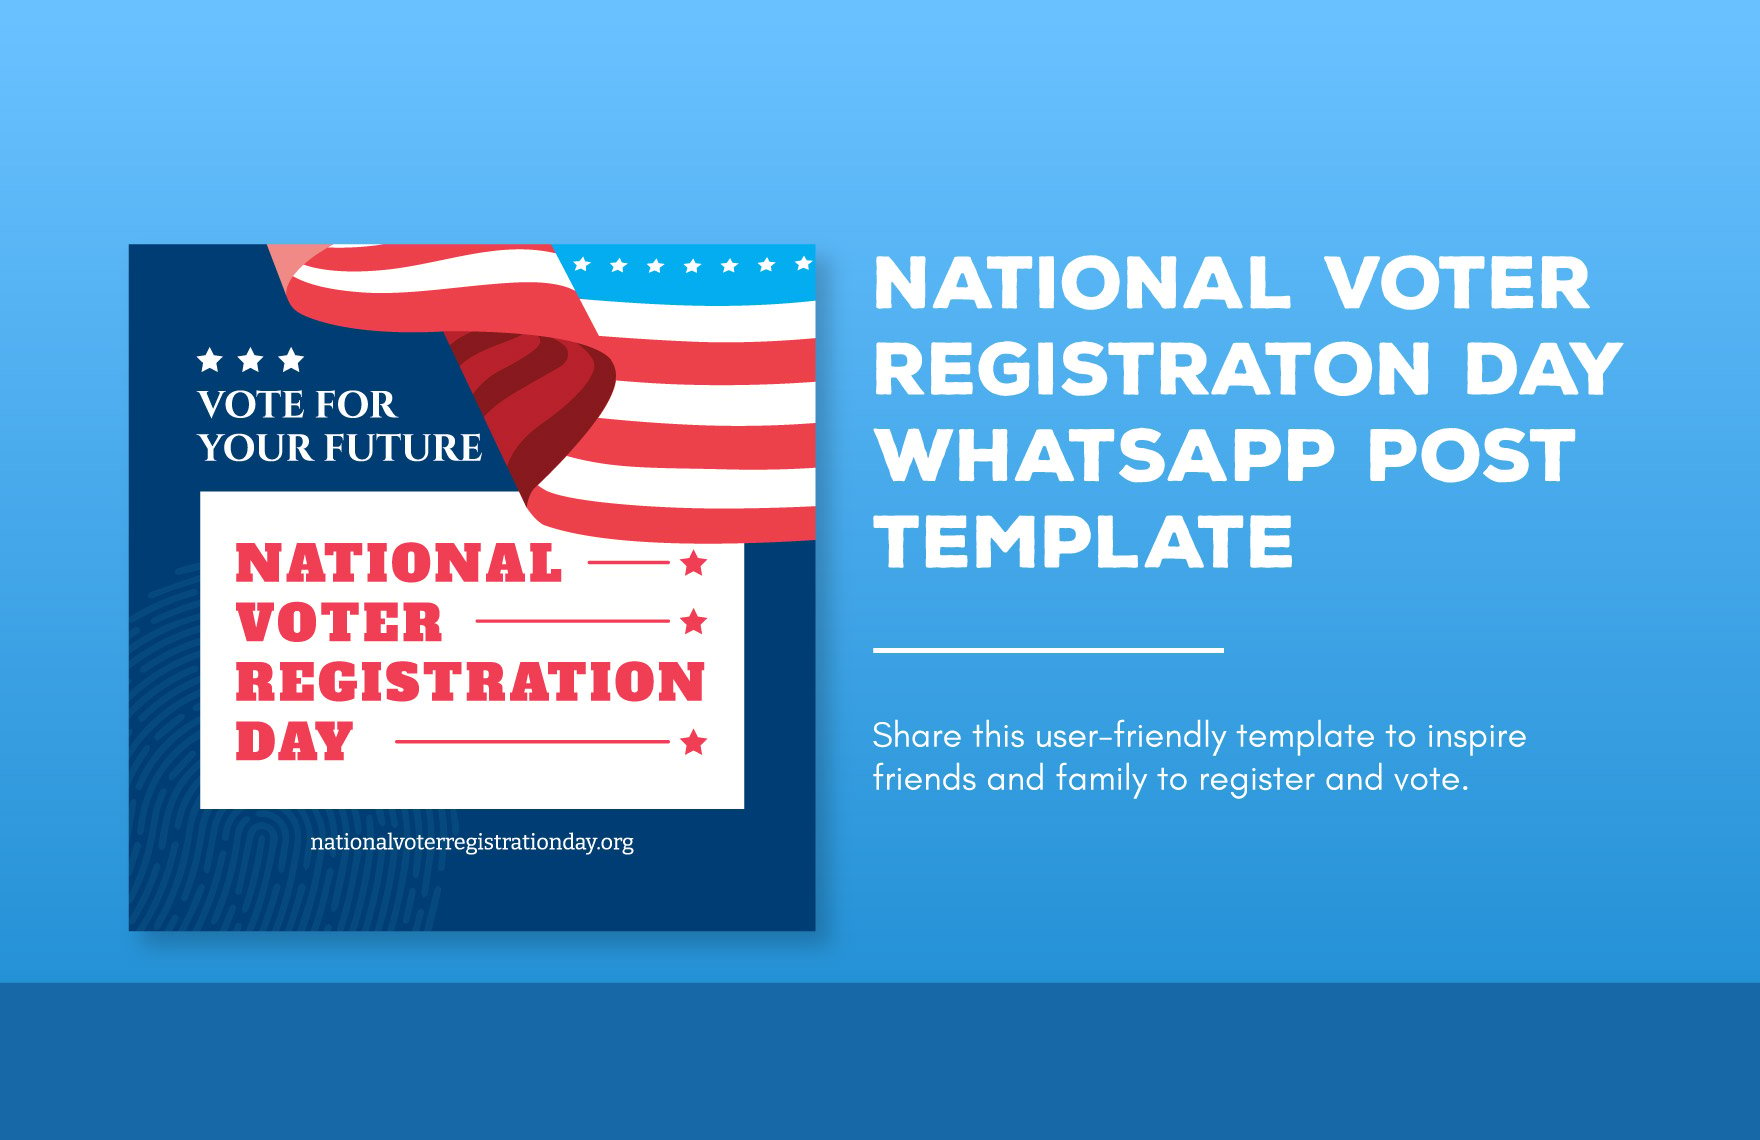 Free National Voter Registration Day WhatsApp Post Template in Illustrator, PSD, PNG